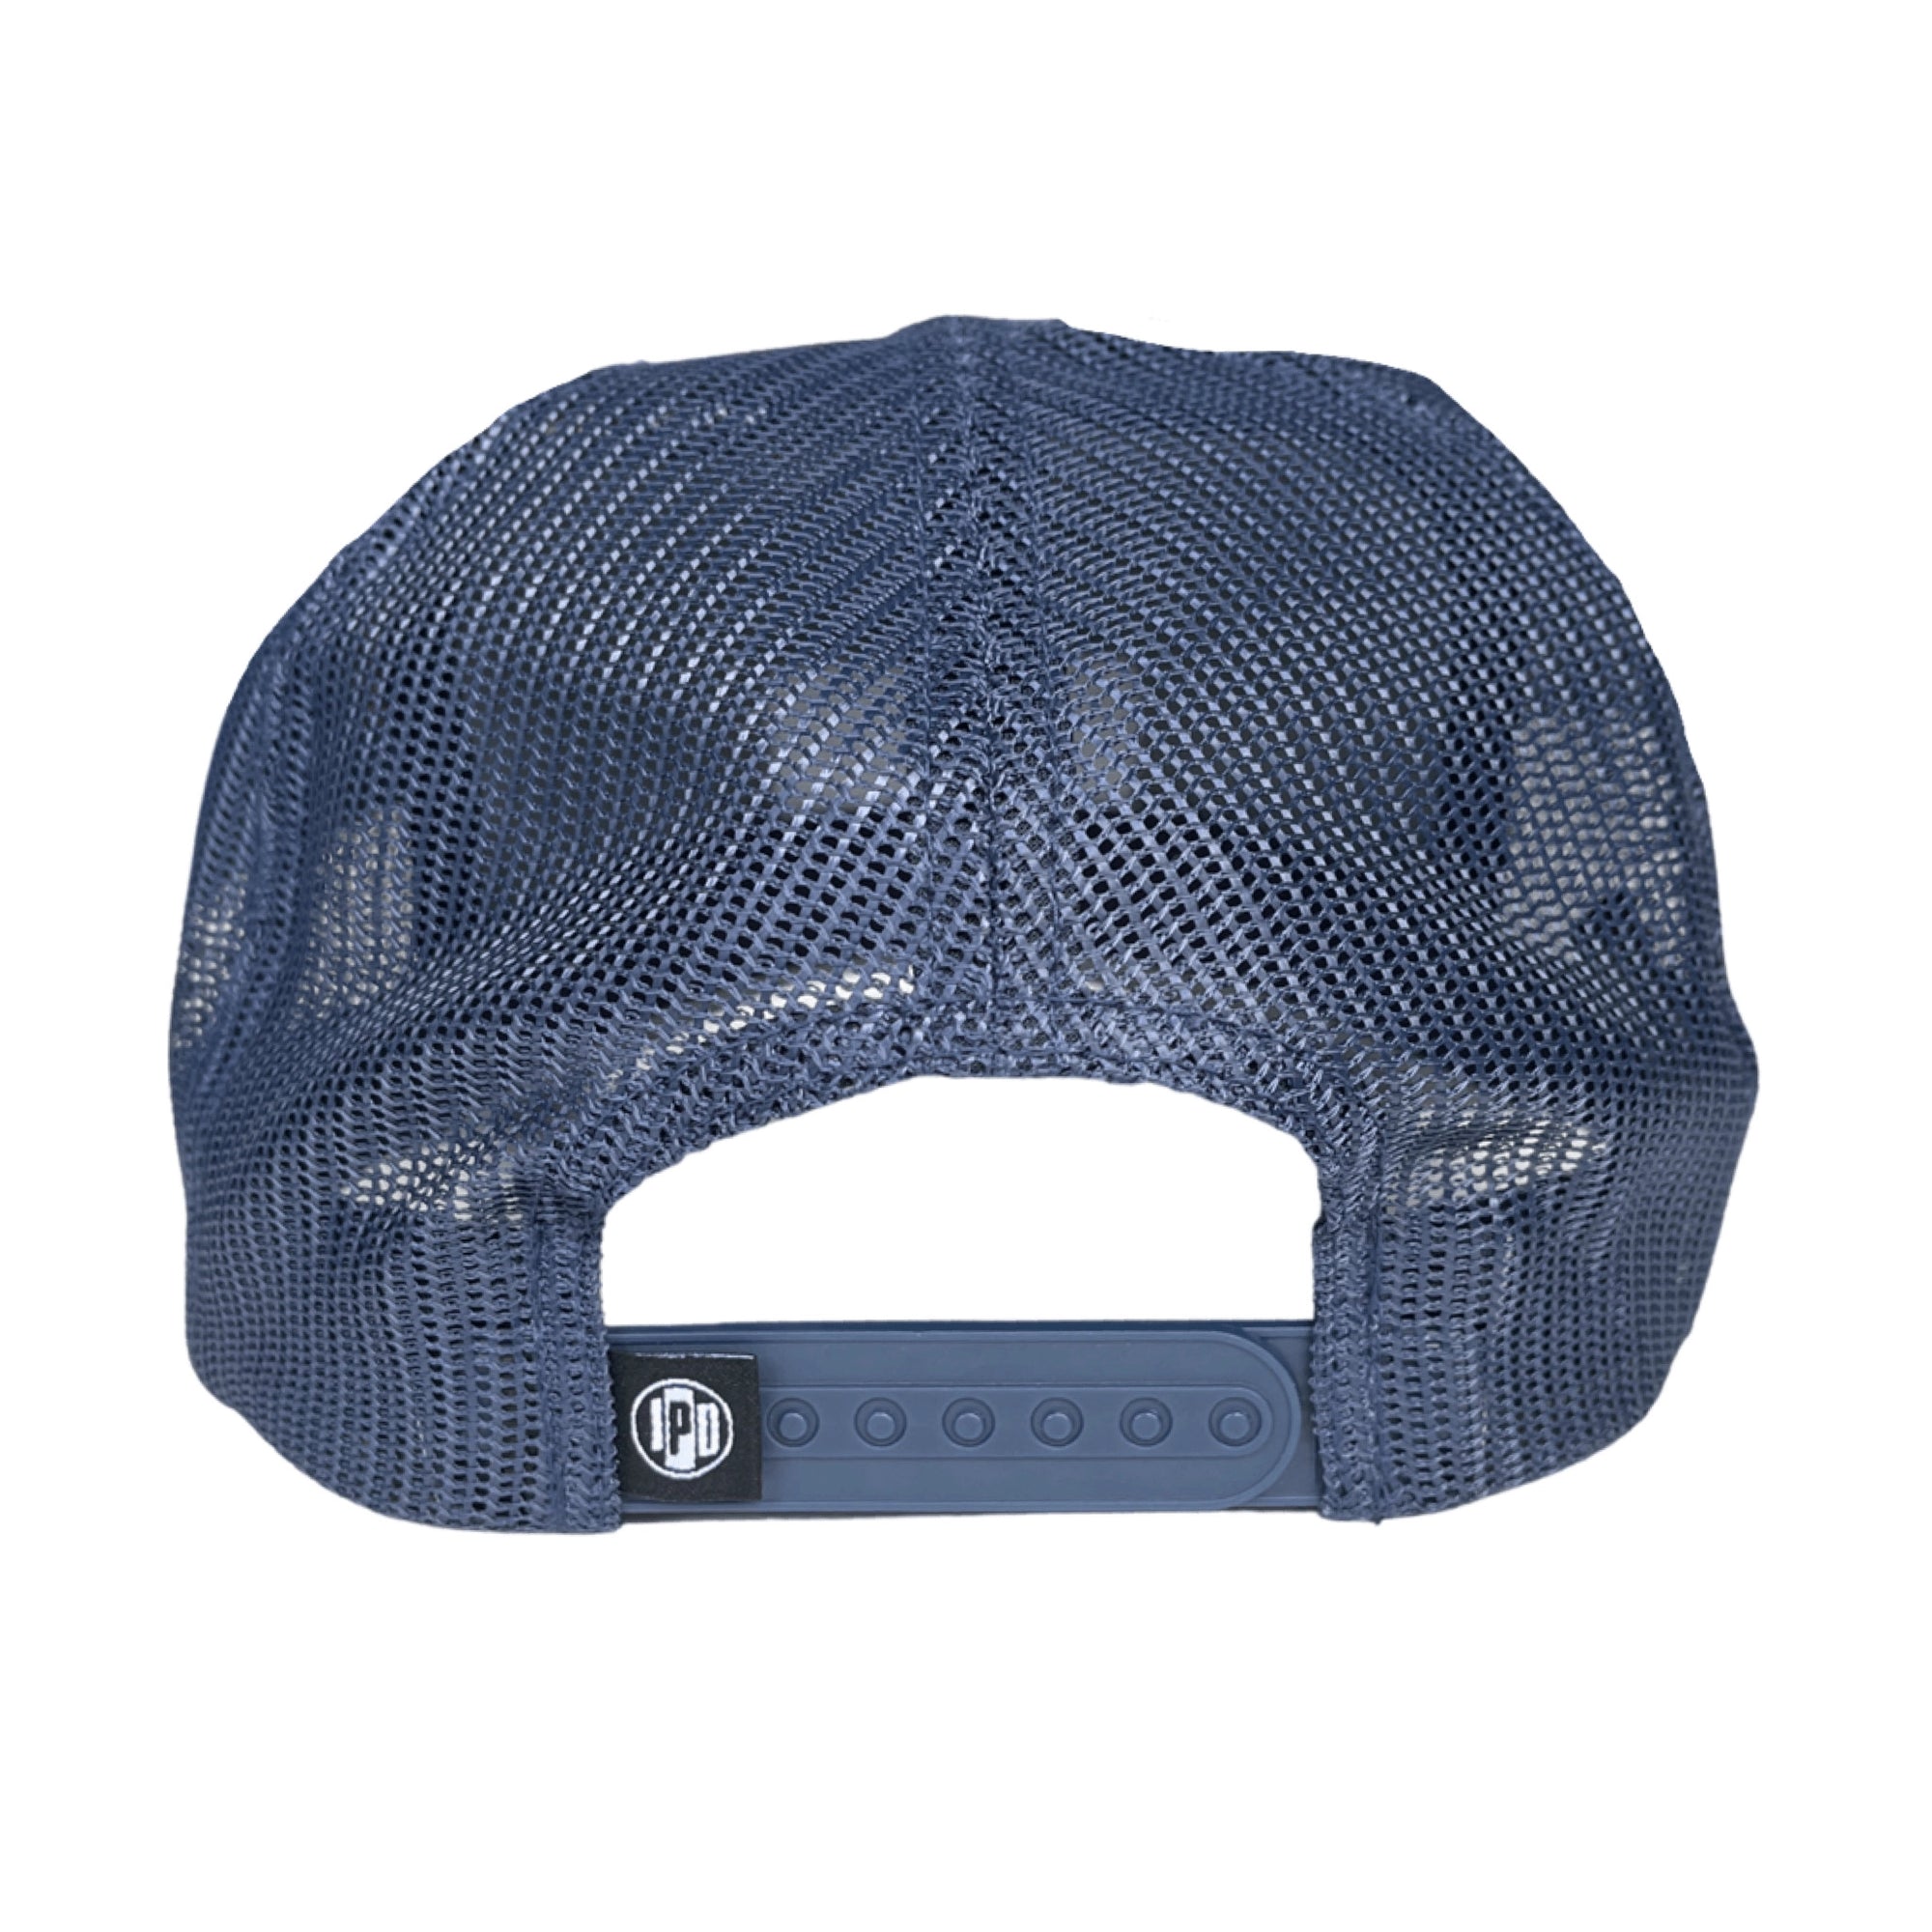 The 1697 Trucker Snapback features a lower profile trucker styling in the dusty blue color with a dark blue mesh back. It features a white and black rectangular front patch with the I P D logo in the center.